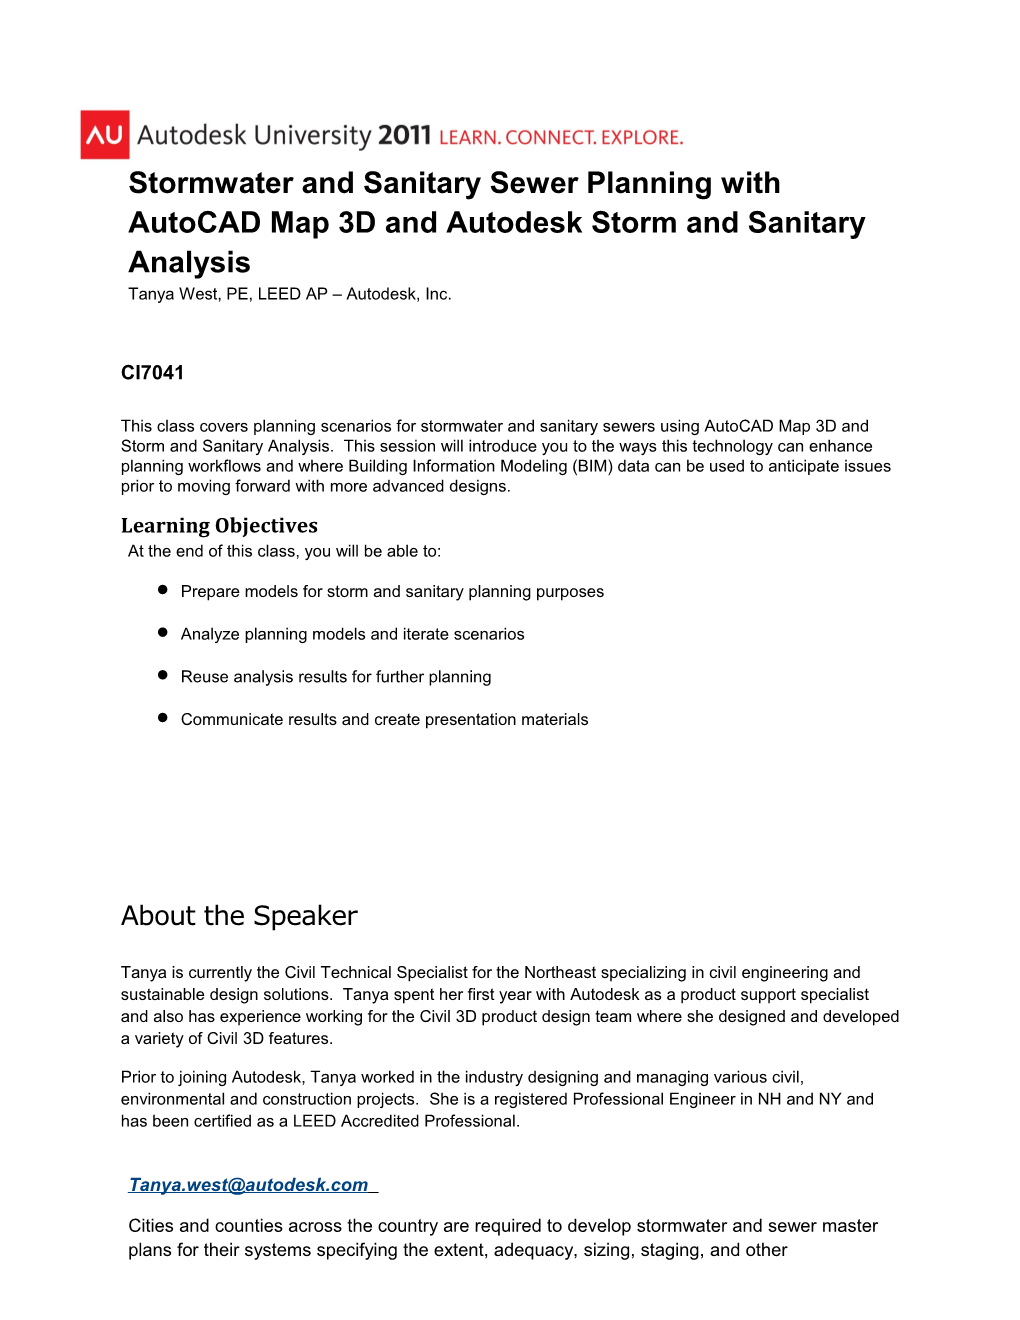 Stormwater and Sanitary Sewer Planning with Autocad Map 3D and Autodesk Storm and Sanitary